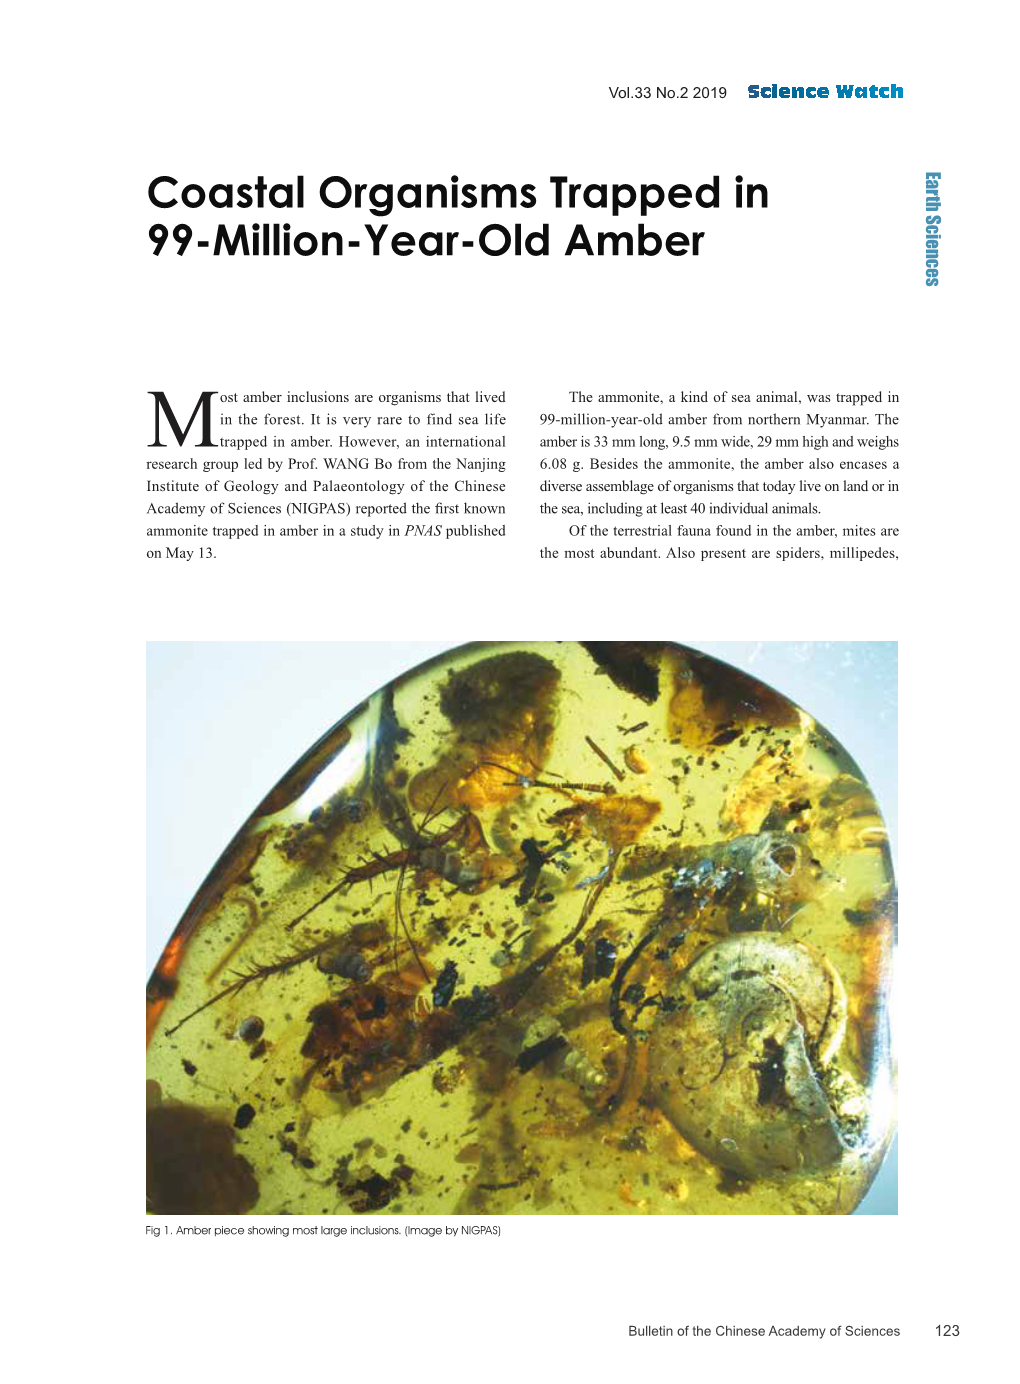 Coastal Organisms Trapped in 99-Million-Year-Old Amber